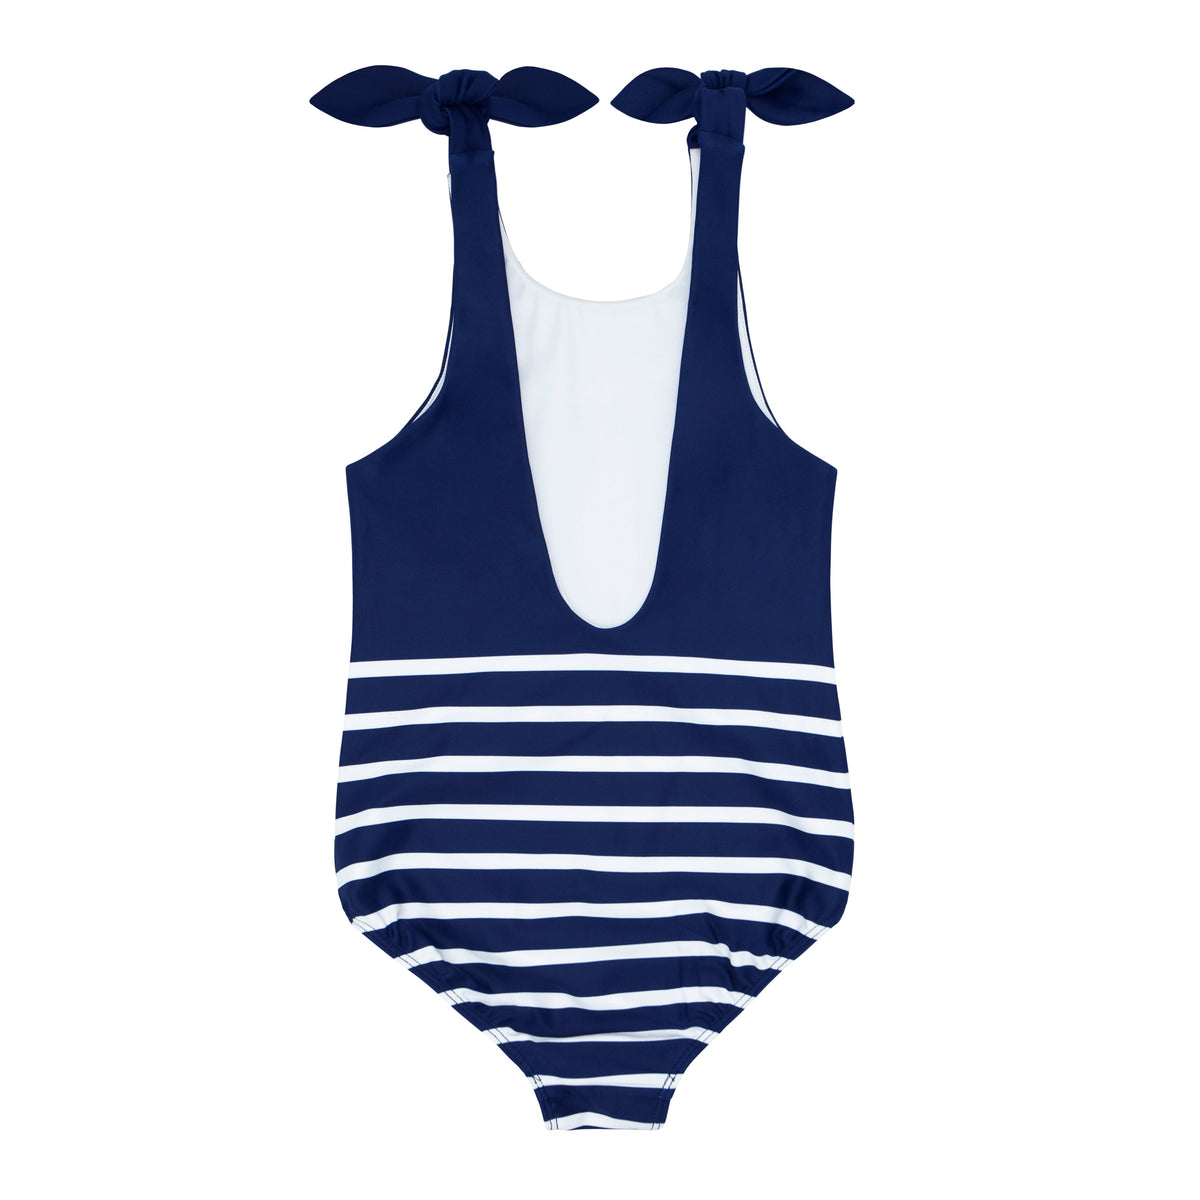 As seen in Sports Illustrated Nautical Blue Stripe Swimsuit - Coral Ties